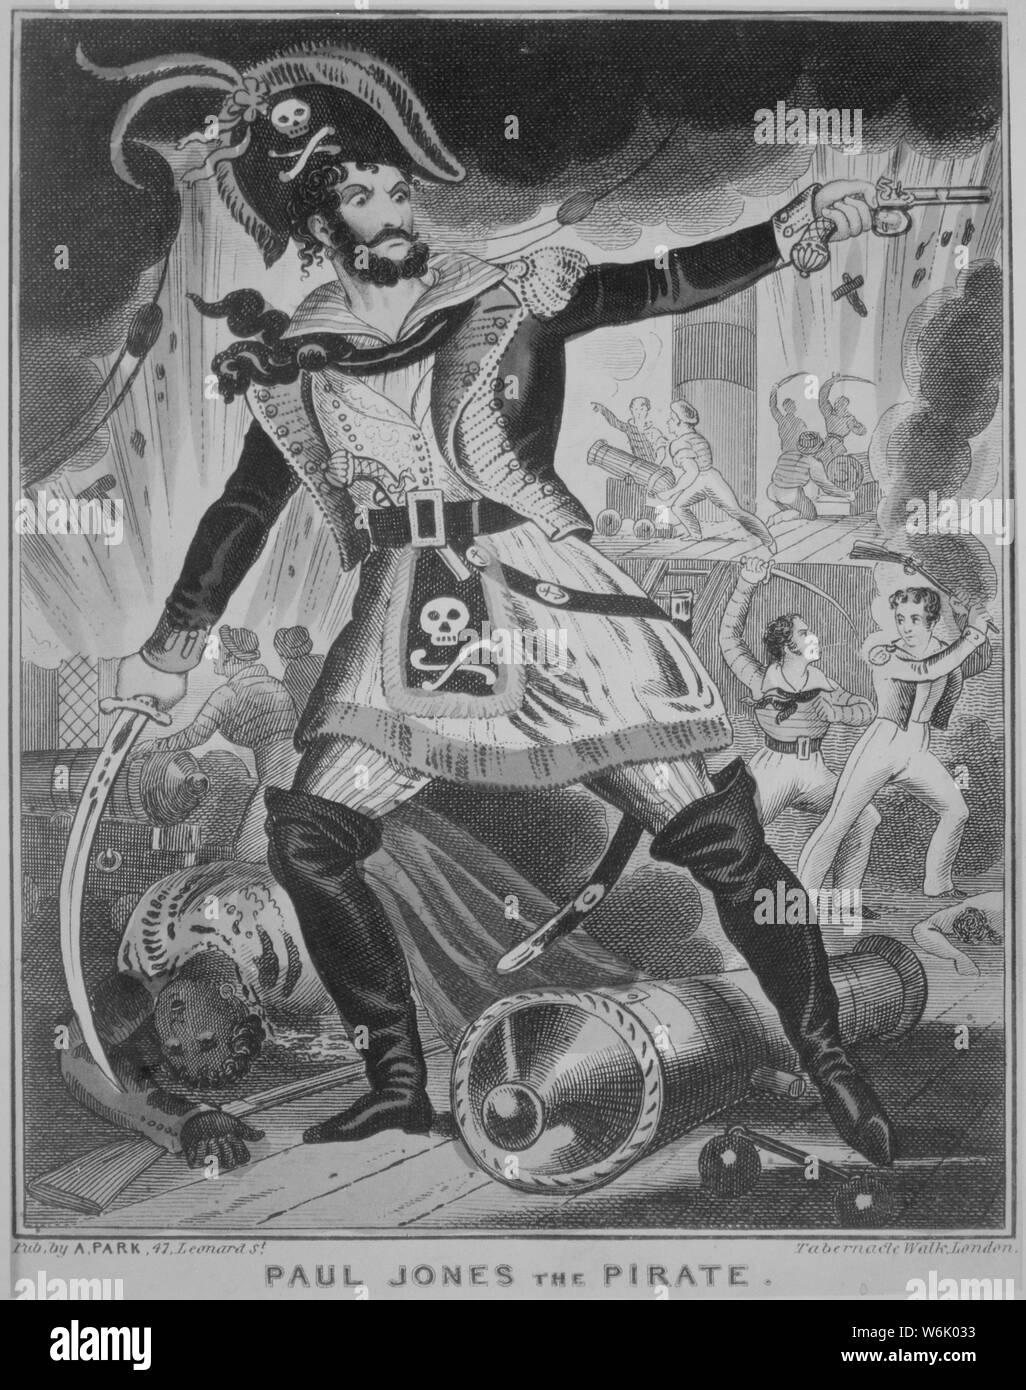 Paul Jones the Pirate. caricature of John Paul Jones. Copy of engraving, circa 1779., 1942 - 1946; General notes:  Use War and Conflict Number 46 when ordering a reproduction or requesting information about this image. Stock Photo